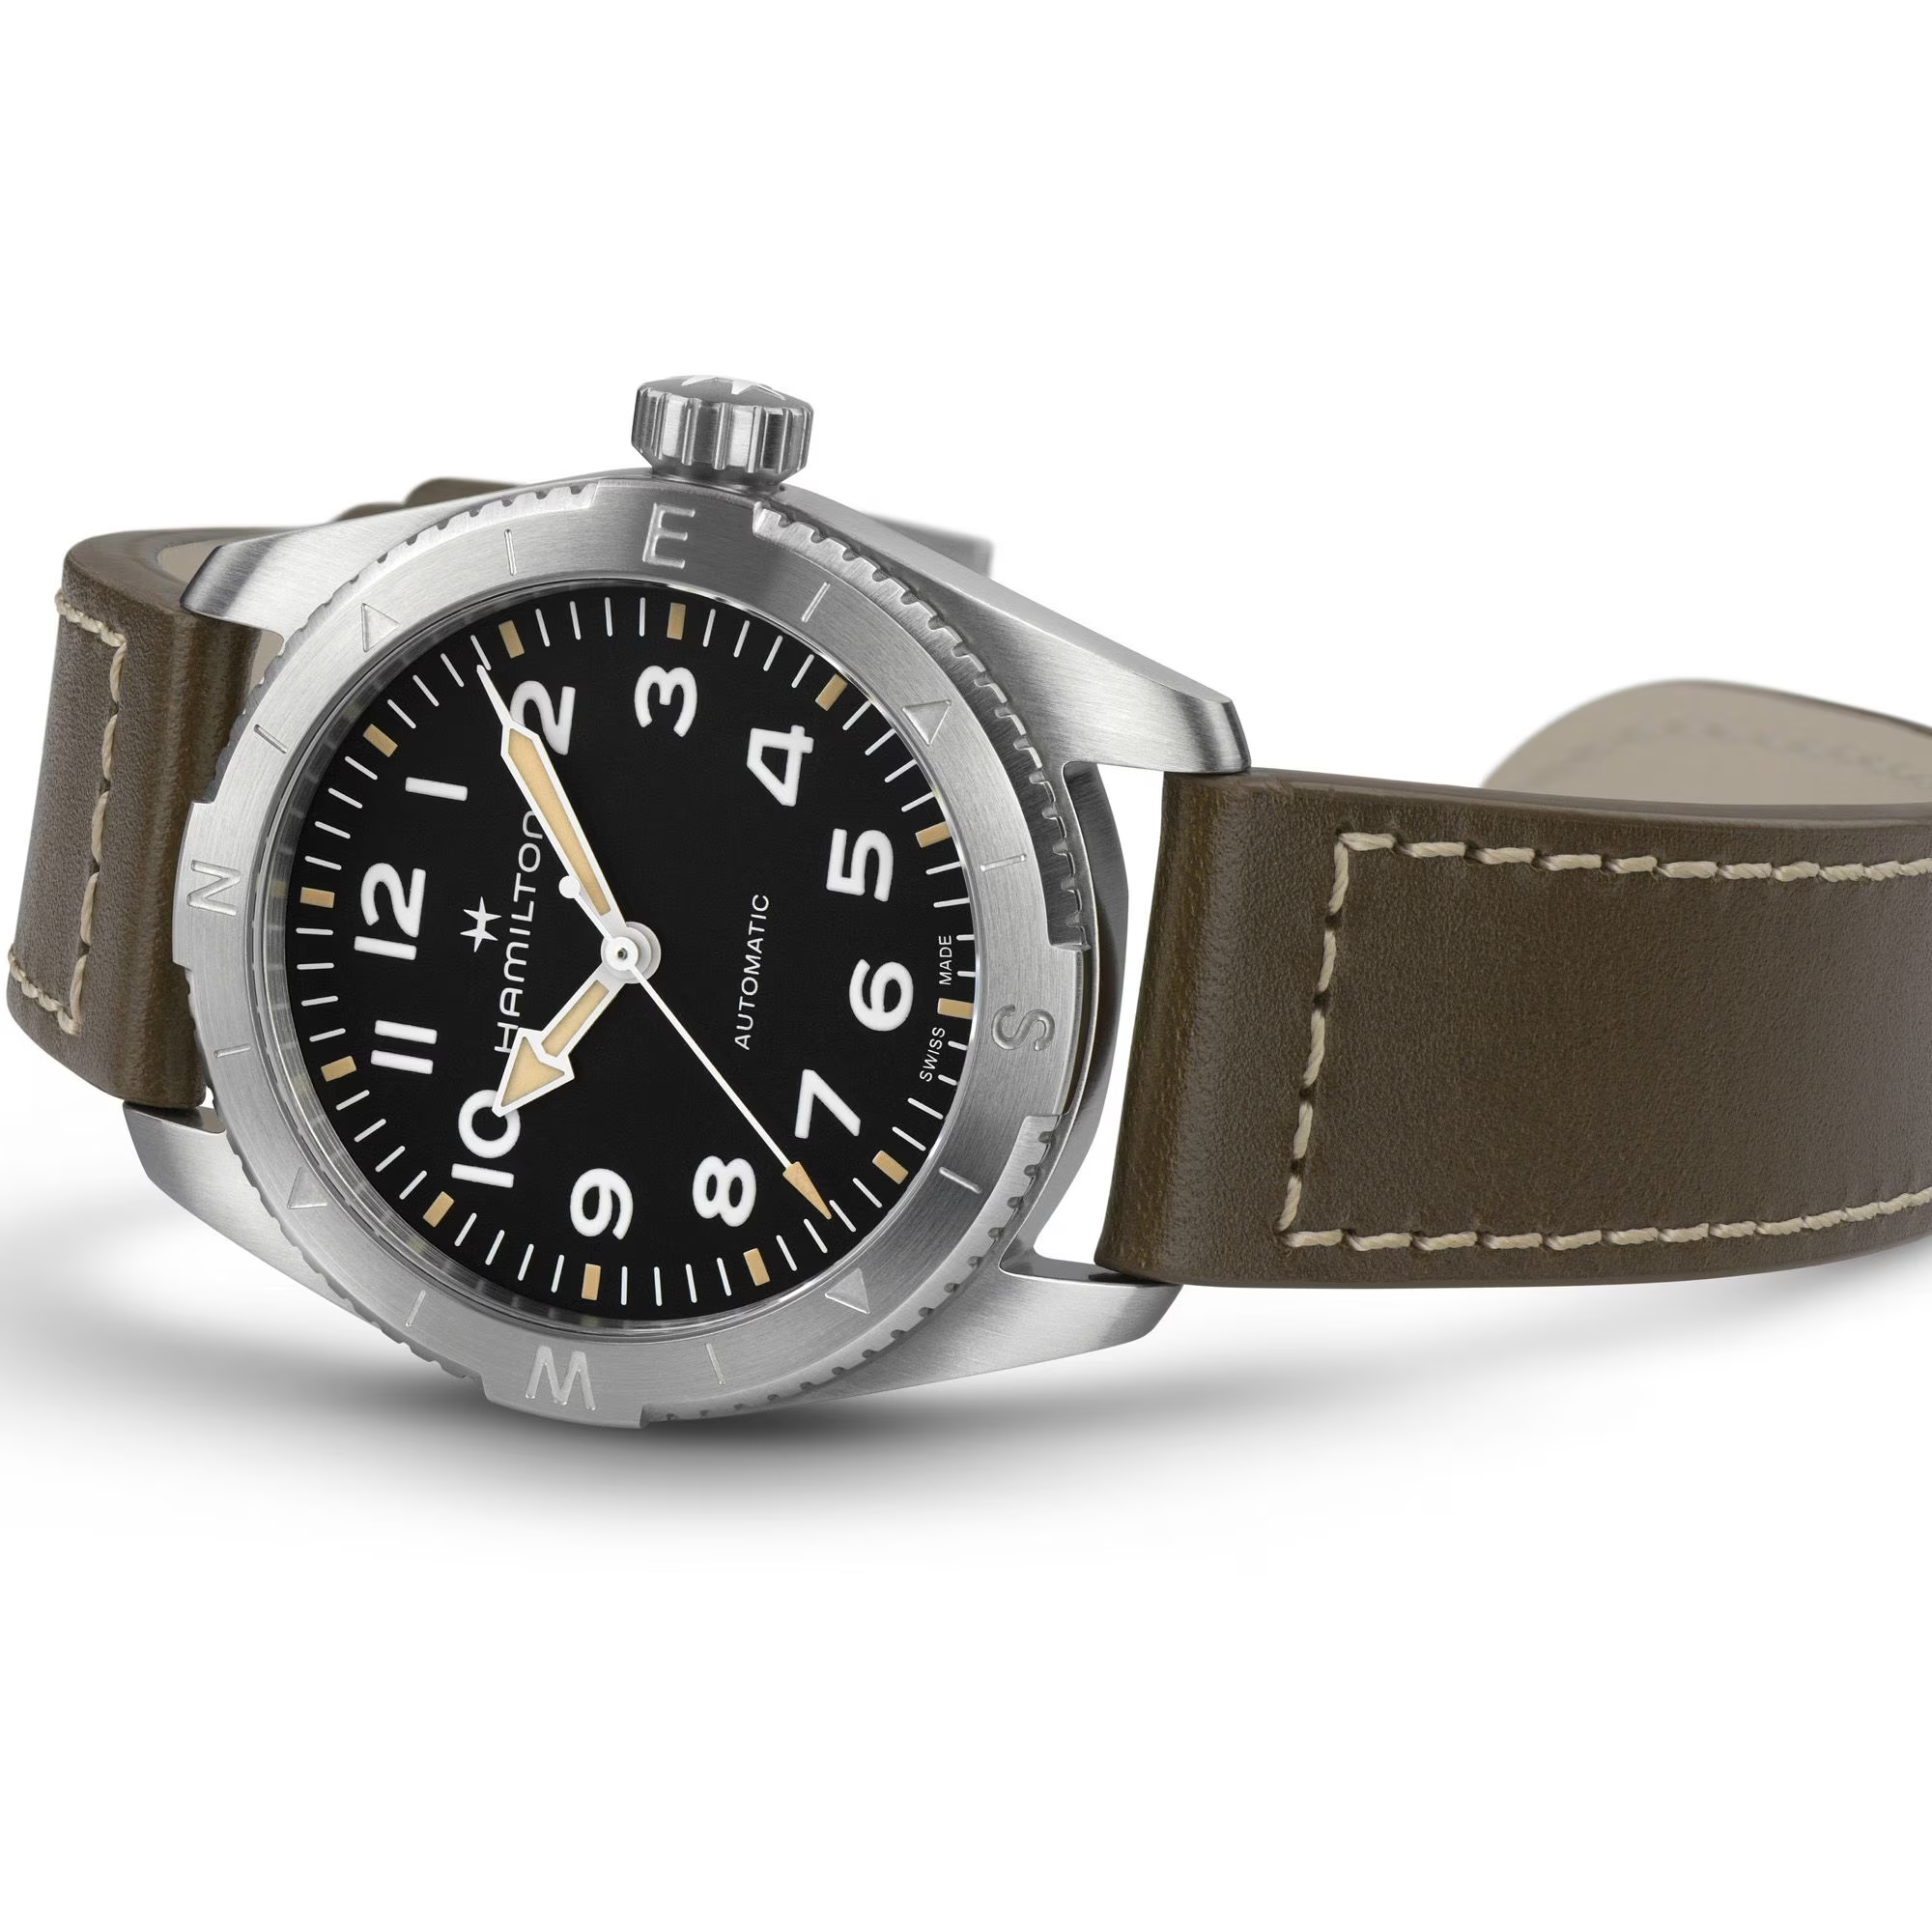 Khaki Field Expedition 37mm Automatic Strap Watch